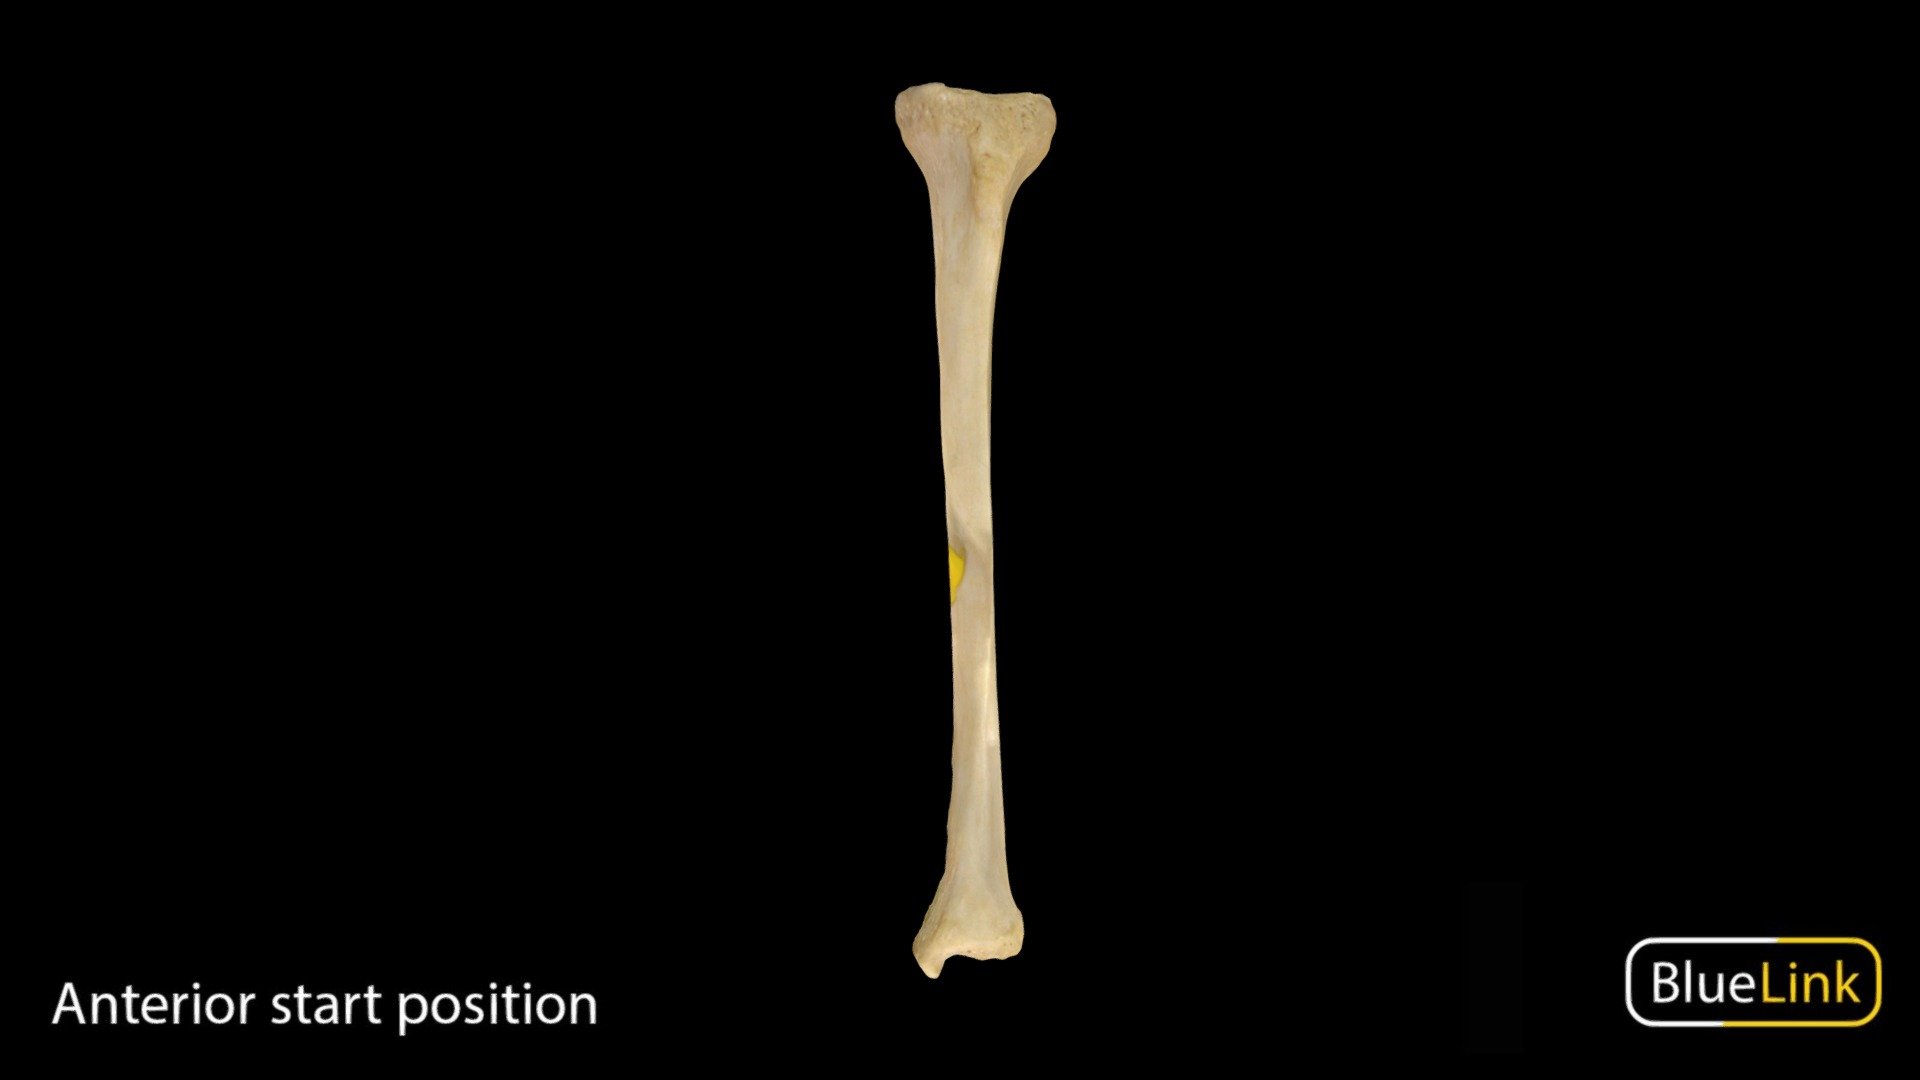 Human tibia

Captured with: EinScan Pro

Captured and edited by: Cristina Prall

University of Michigan - Tibia - 3D model by Bluelink Anatomy - University of Michigan (@bluelinkanatomy) 3d model